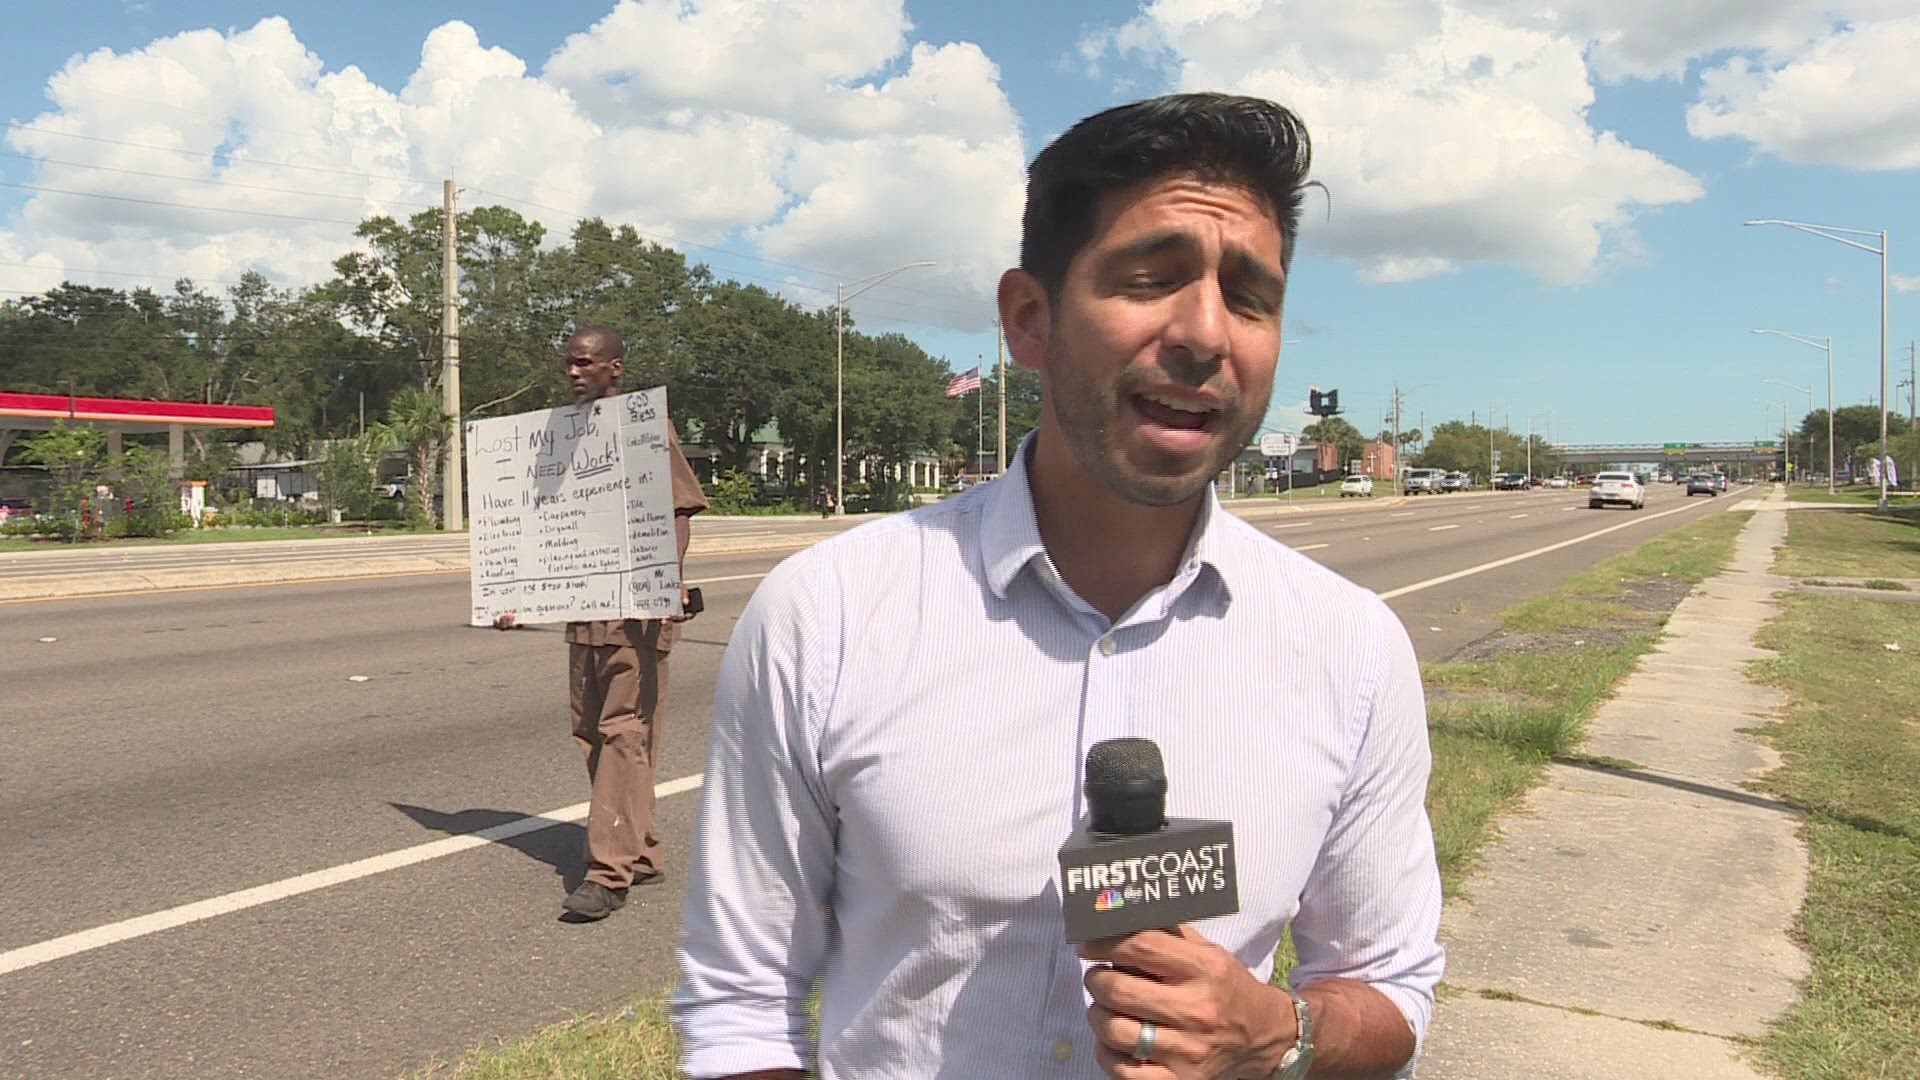 The story behind a viral photo of a man holding a handwritten sign on the corner of Beach Blvd.